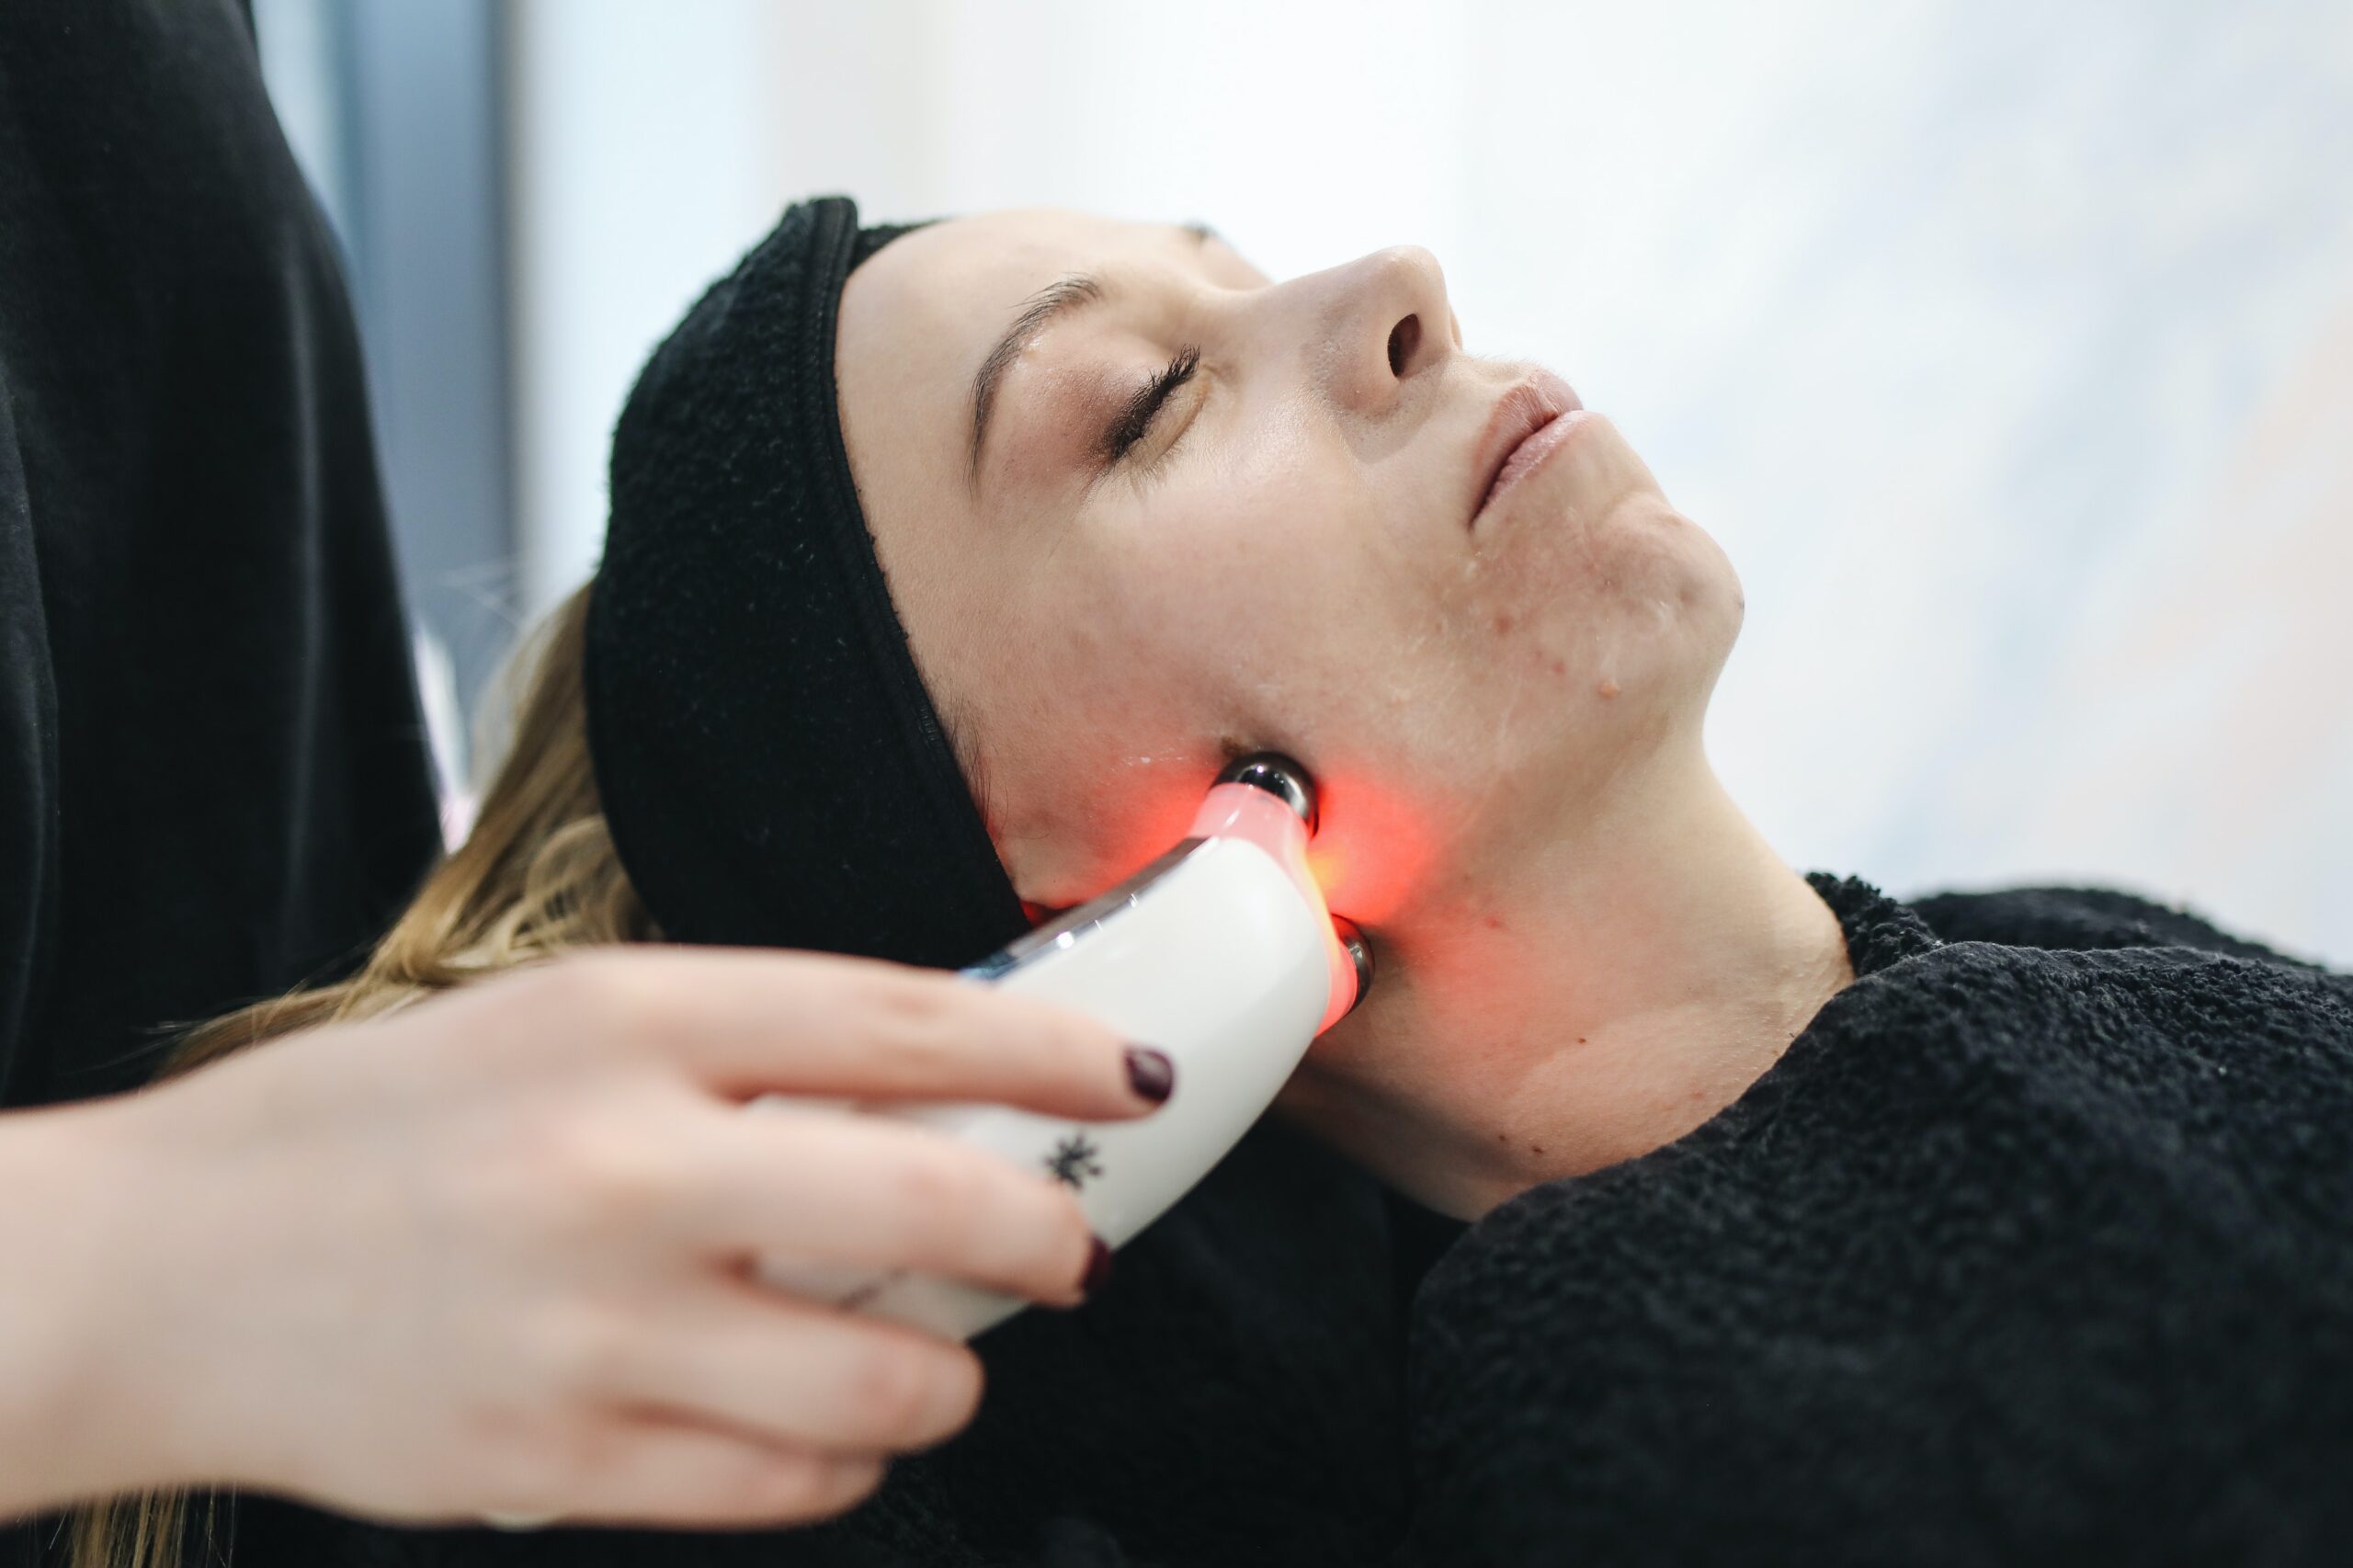 Which Skin Laser Treatment Is Best for Acne Scars?